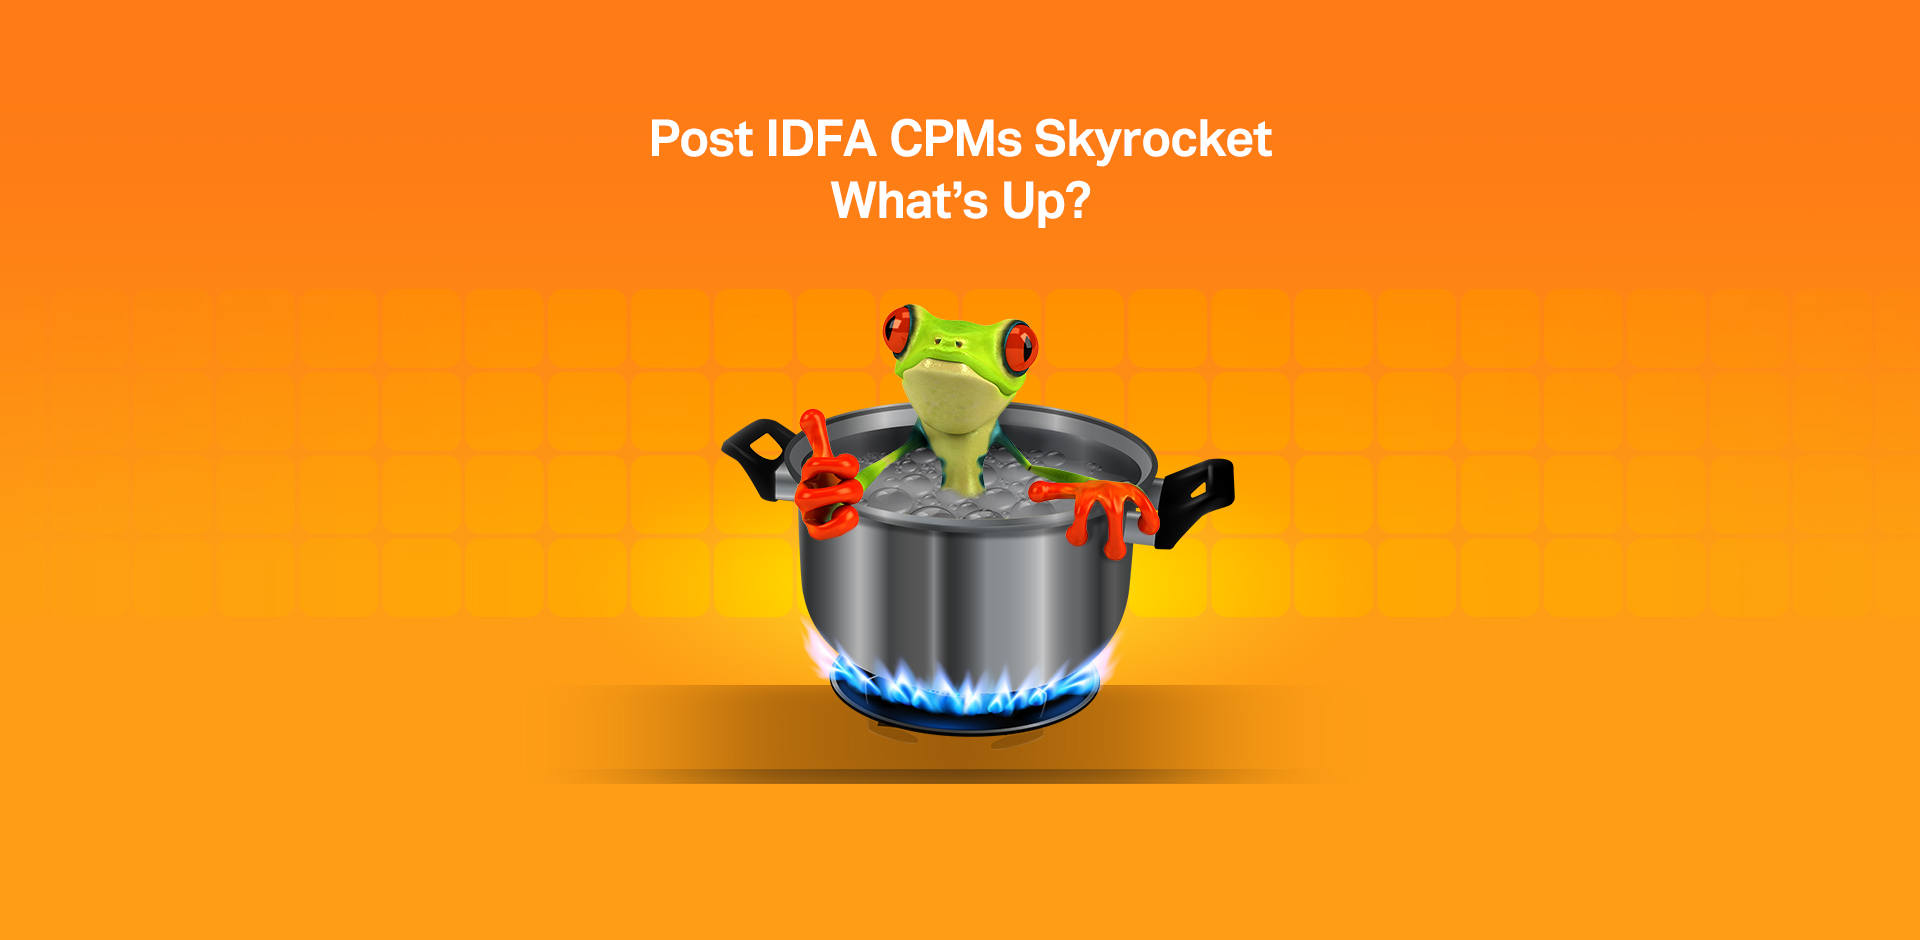 Post IDFA CPMs Have Skyrocketed! What’s Up?